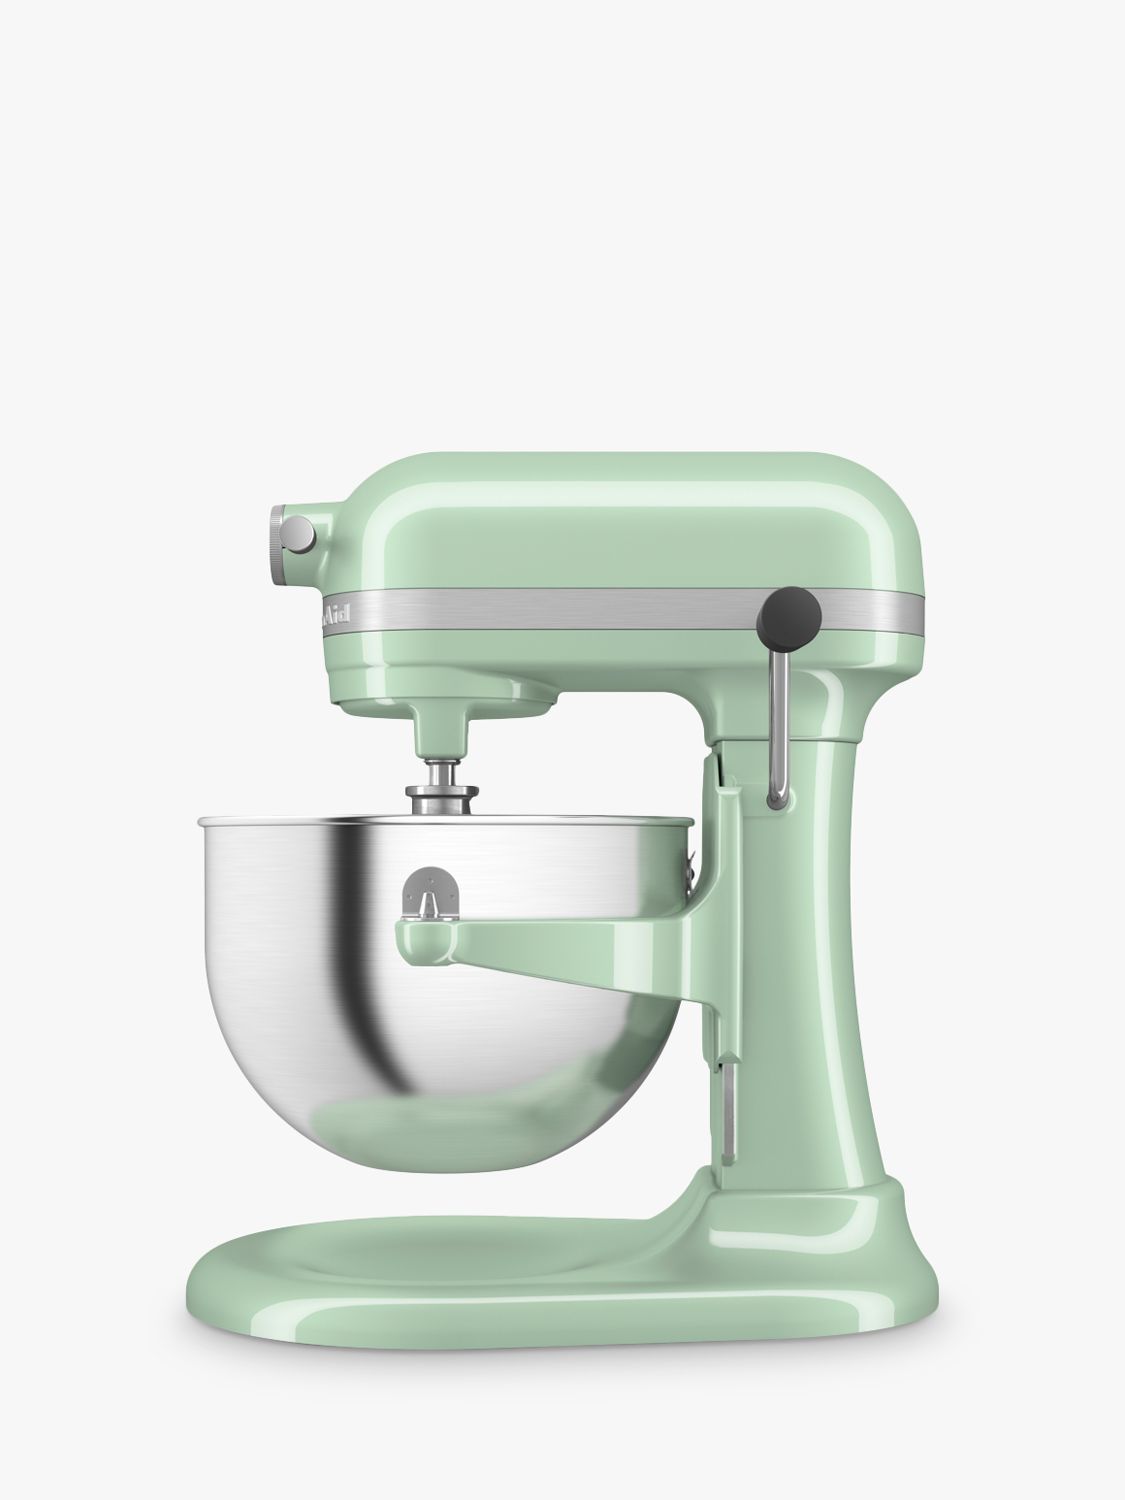 New KitchenAid Artisan 5.6L Stand Mixer With A Clever Half Speed For Folding